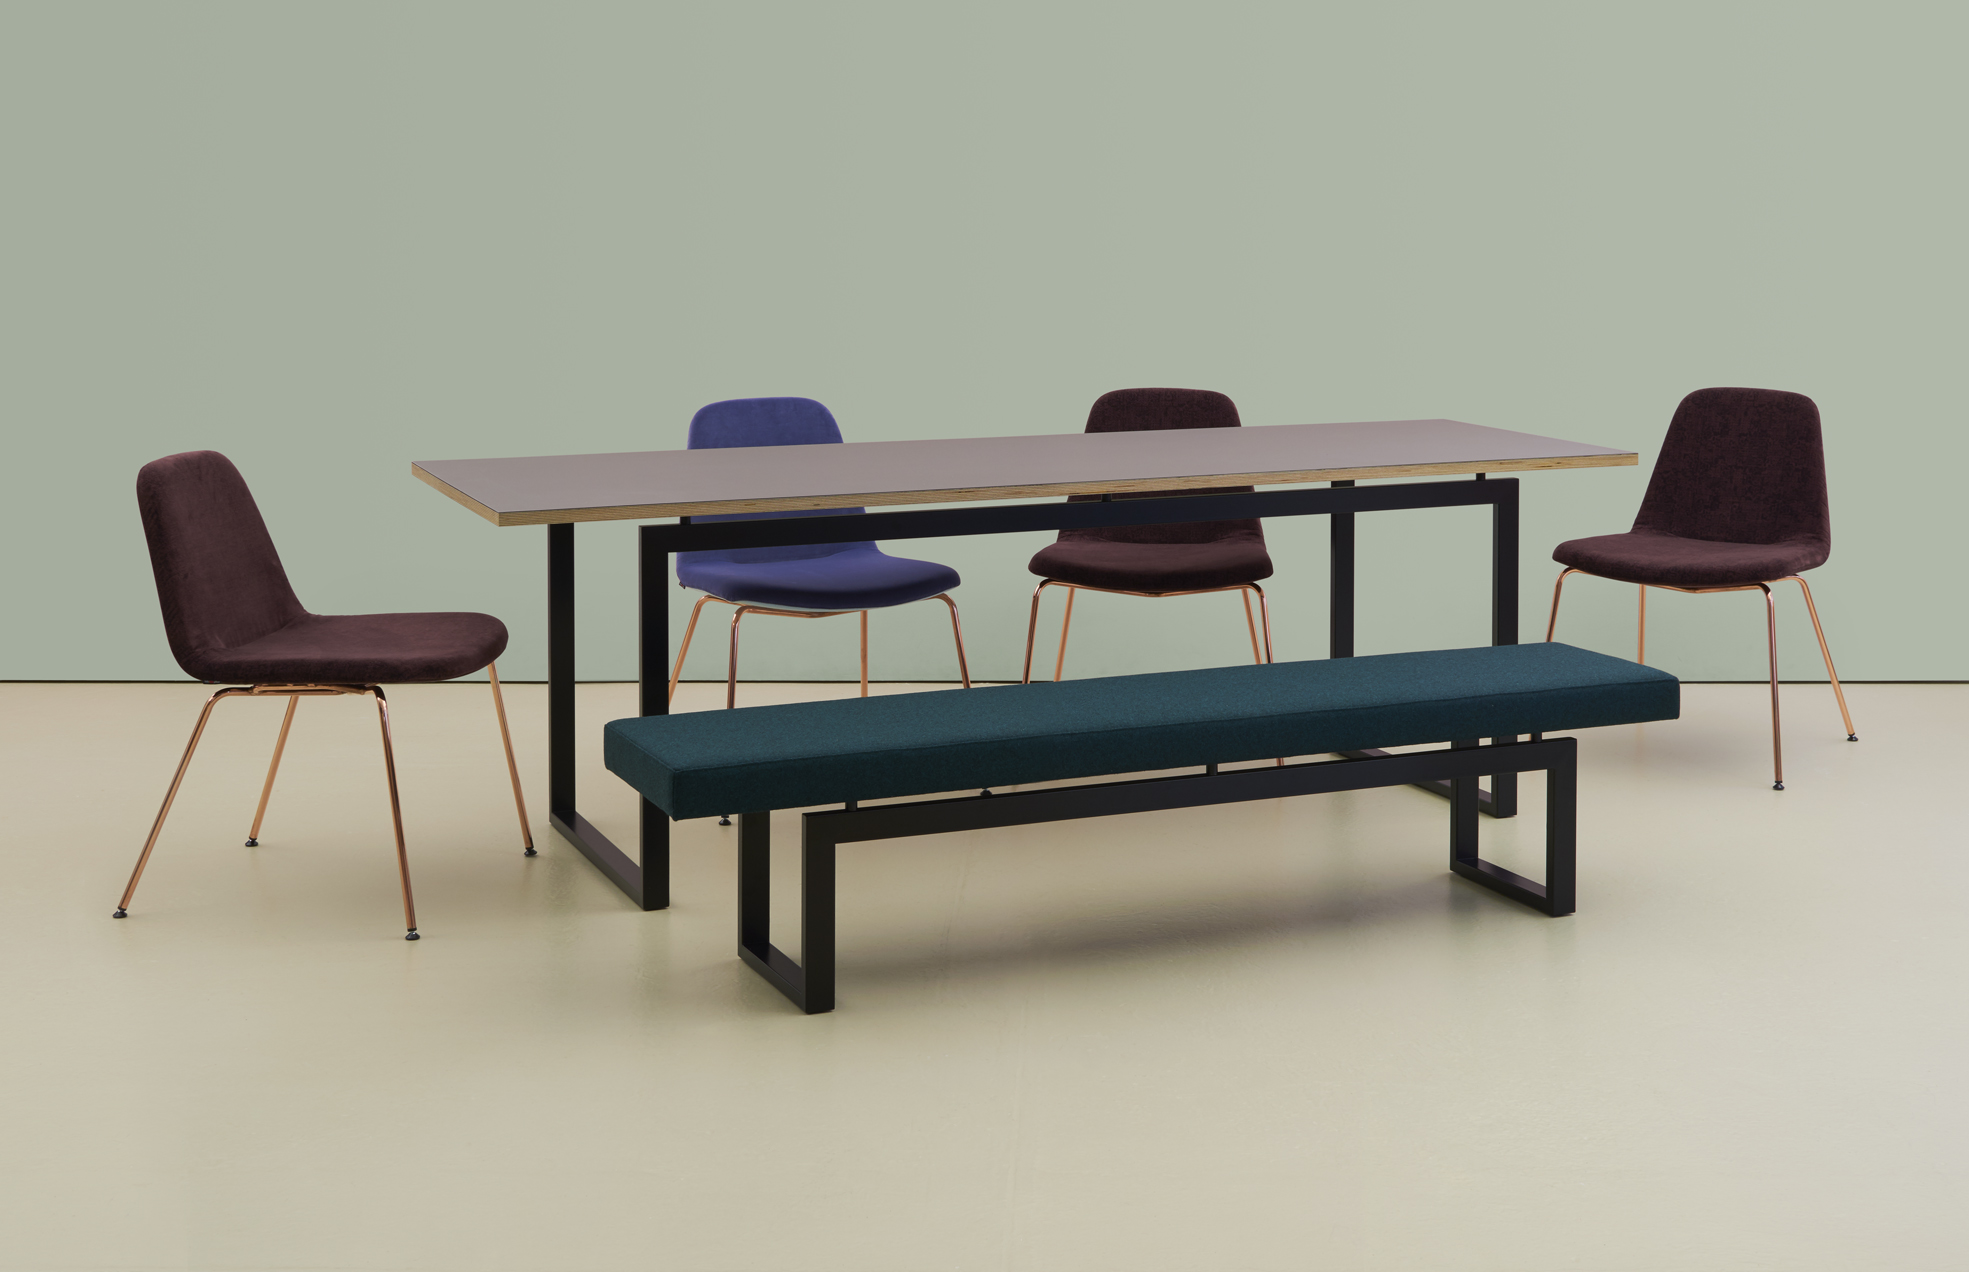 hm107 table with hm106b bench and hm58b chairs (low res).jpg